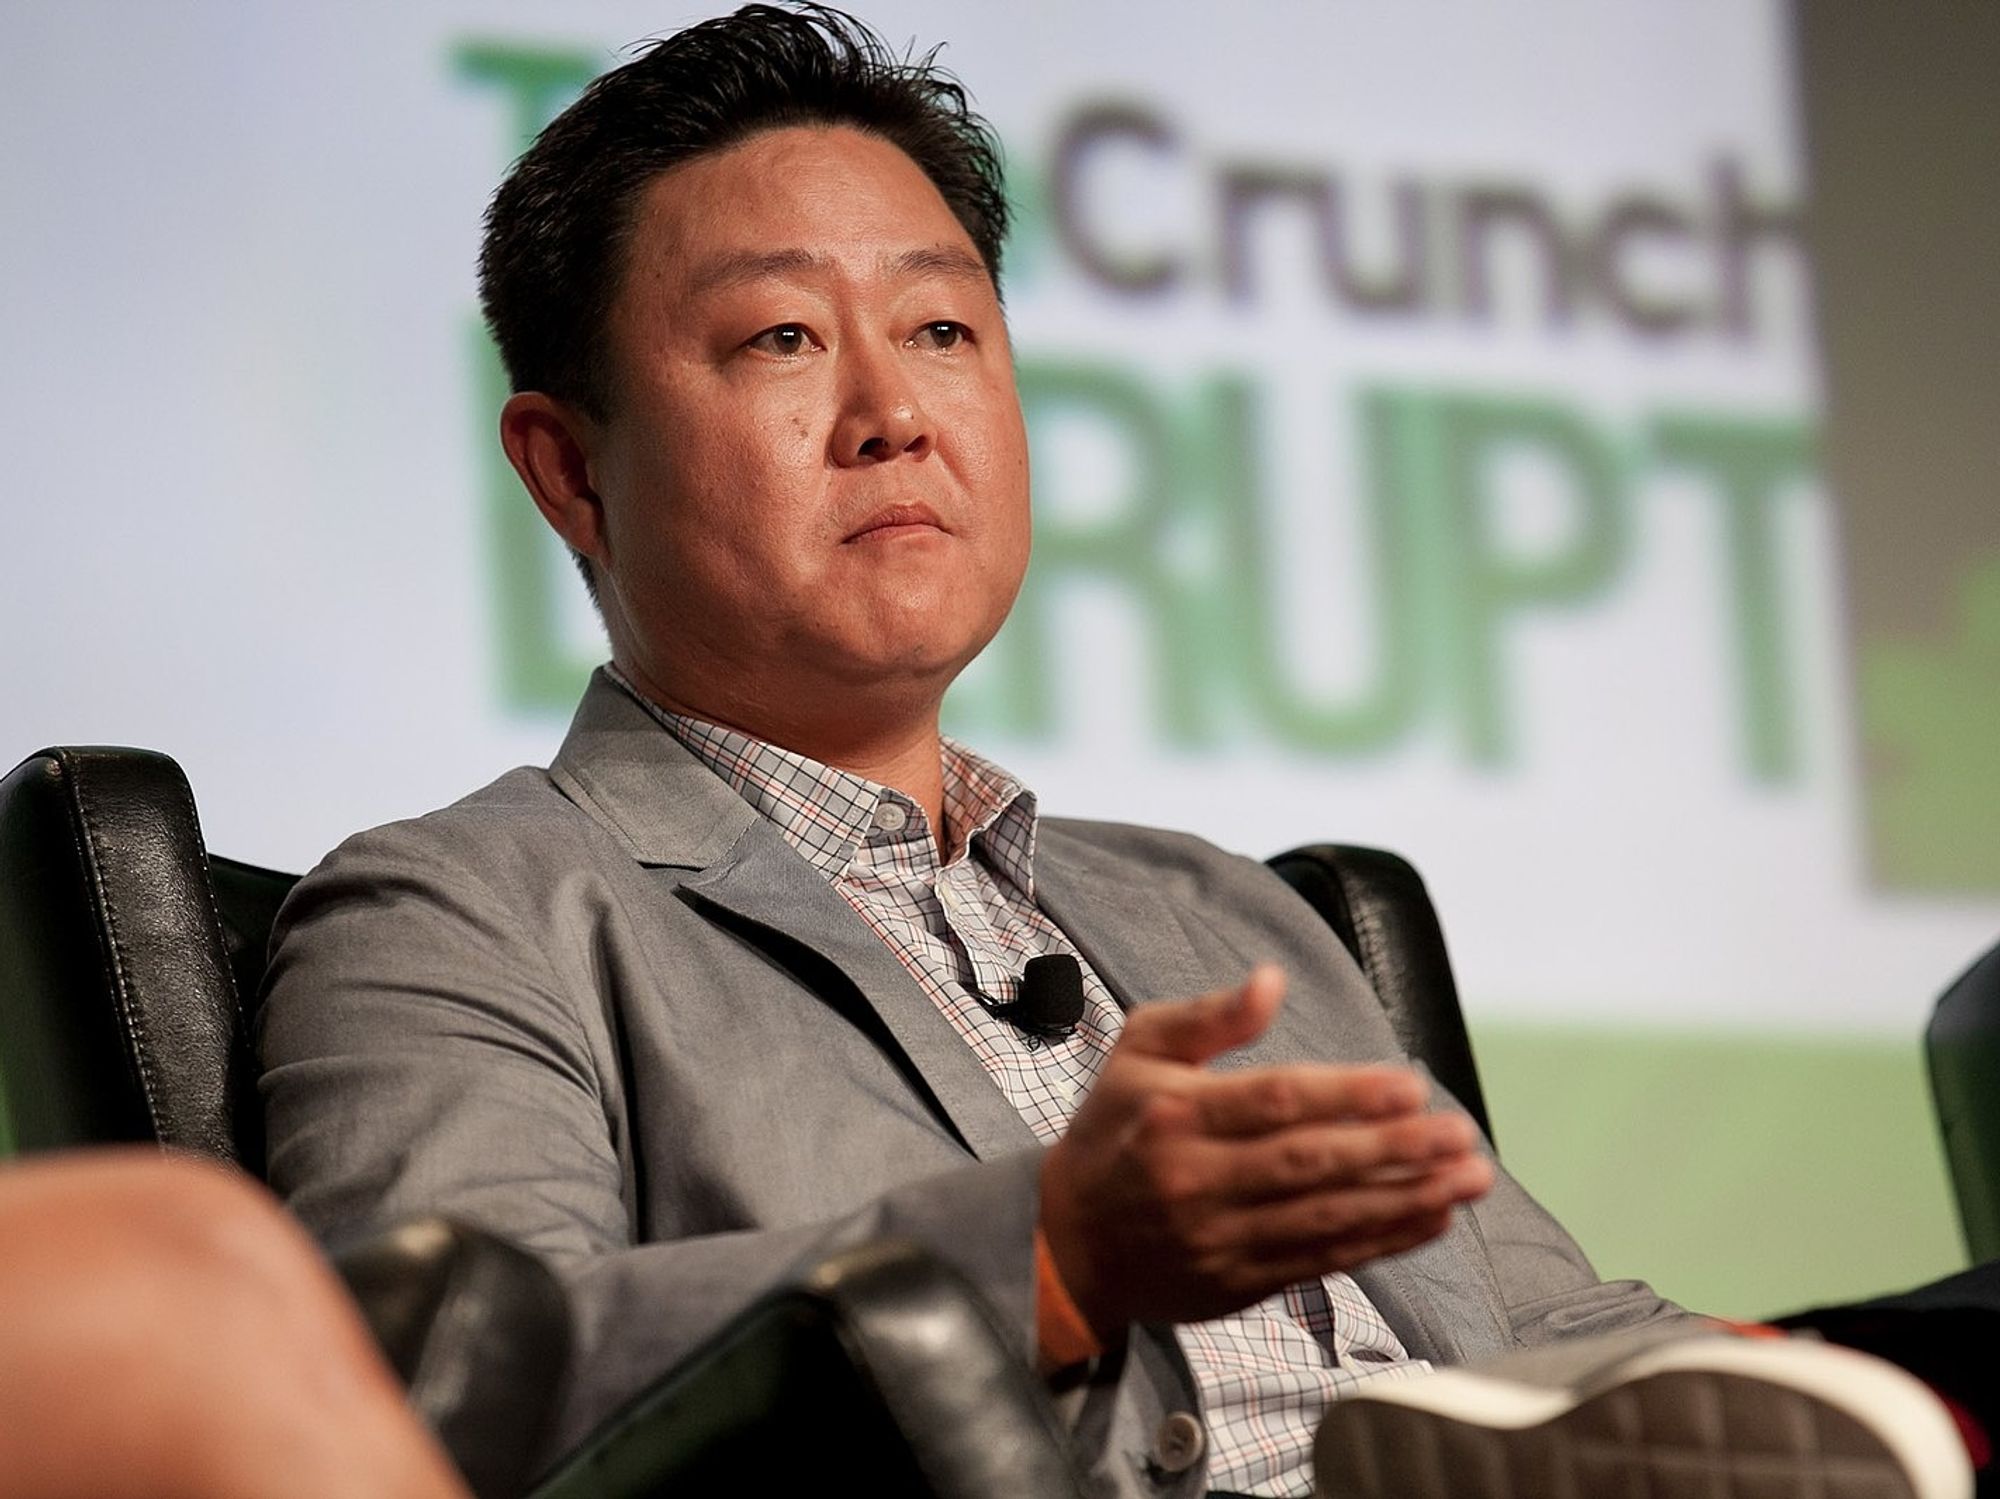 'I Just Really Liked Their Vibe:' Serial Entrepreneur Brian Lee on How He Landed L.A.'s Biggest Exit and What Drives Him Crazy About Other VC's